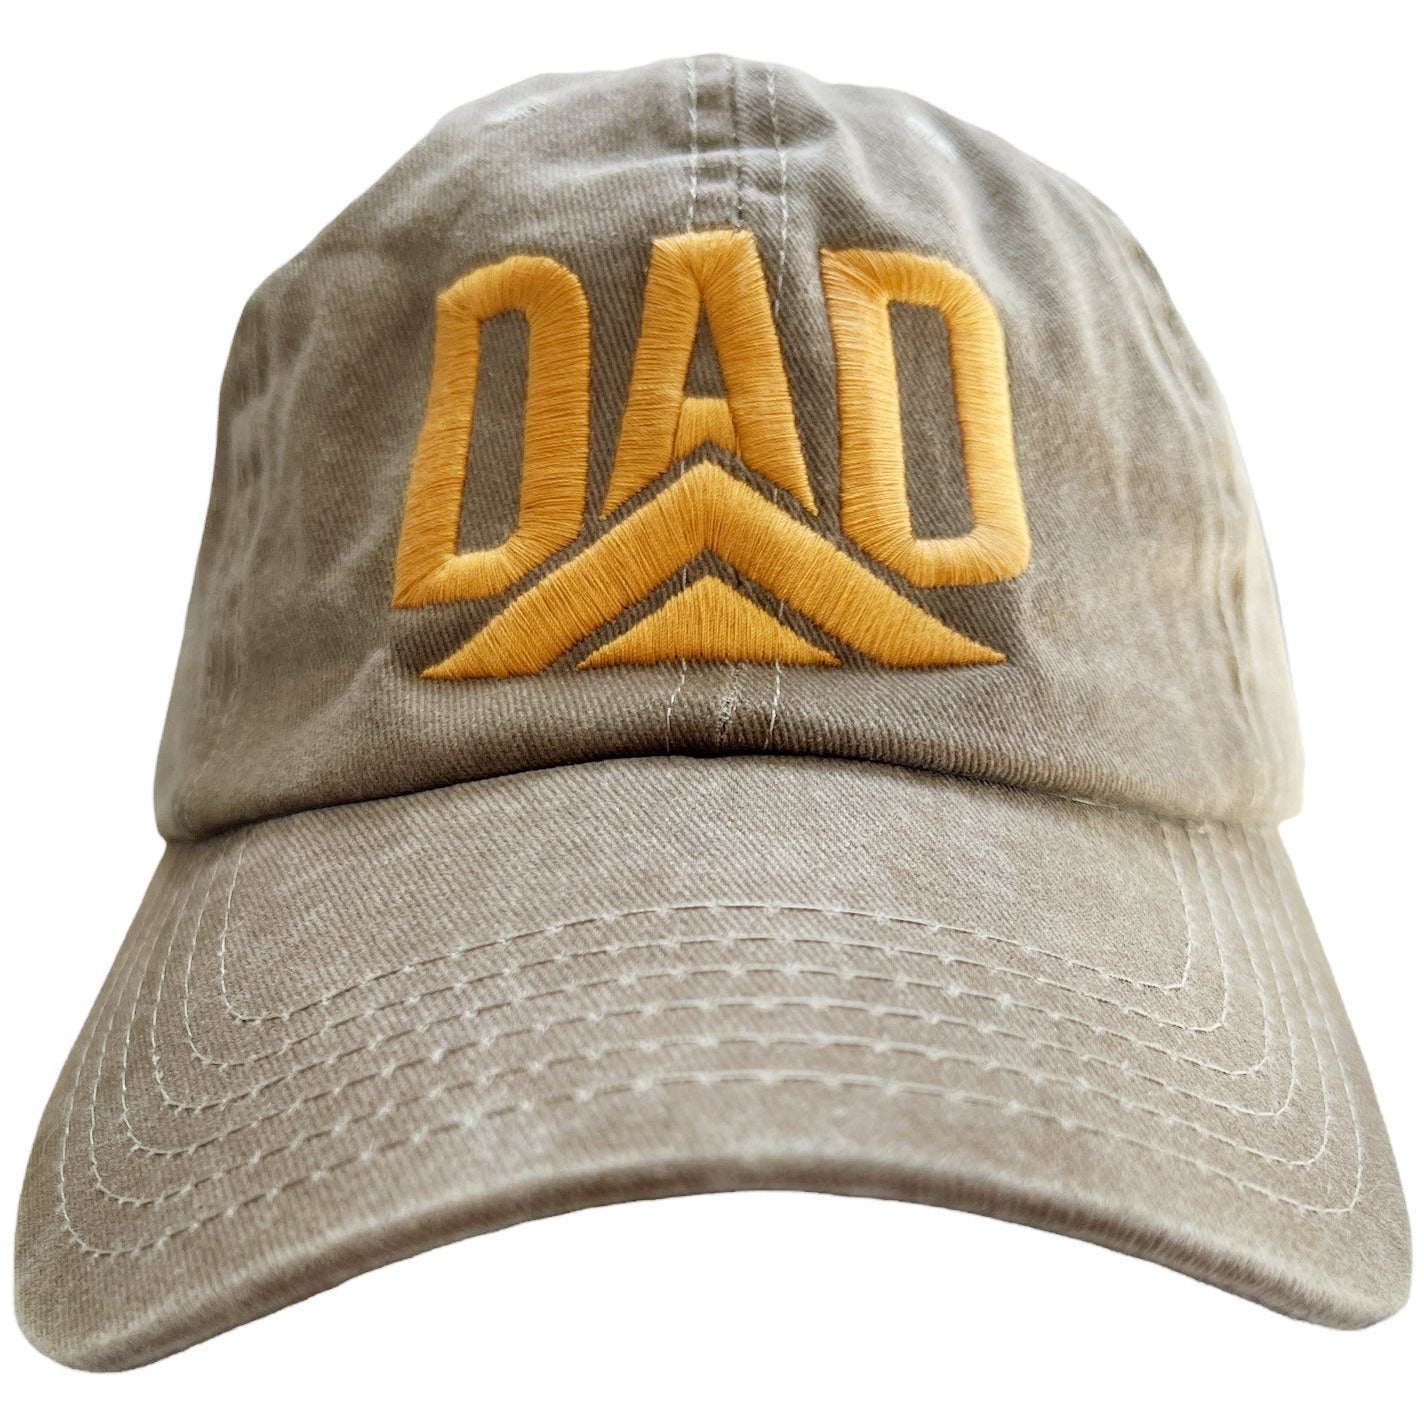 Embroidered Dad Cap Vintage Army